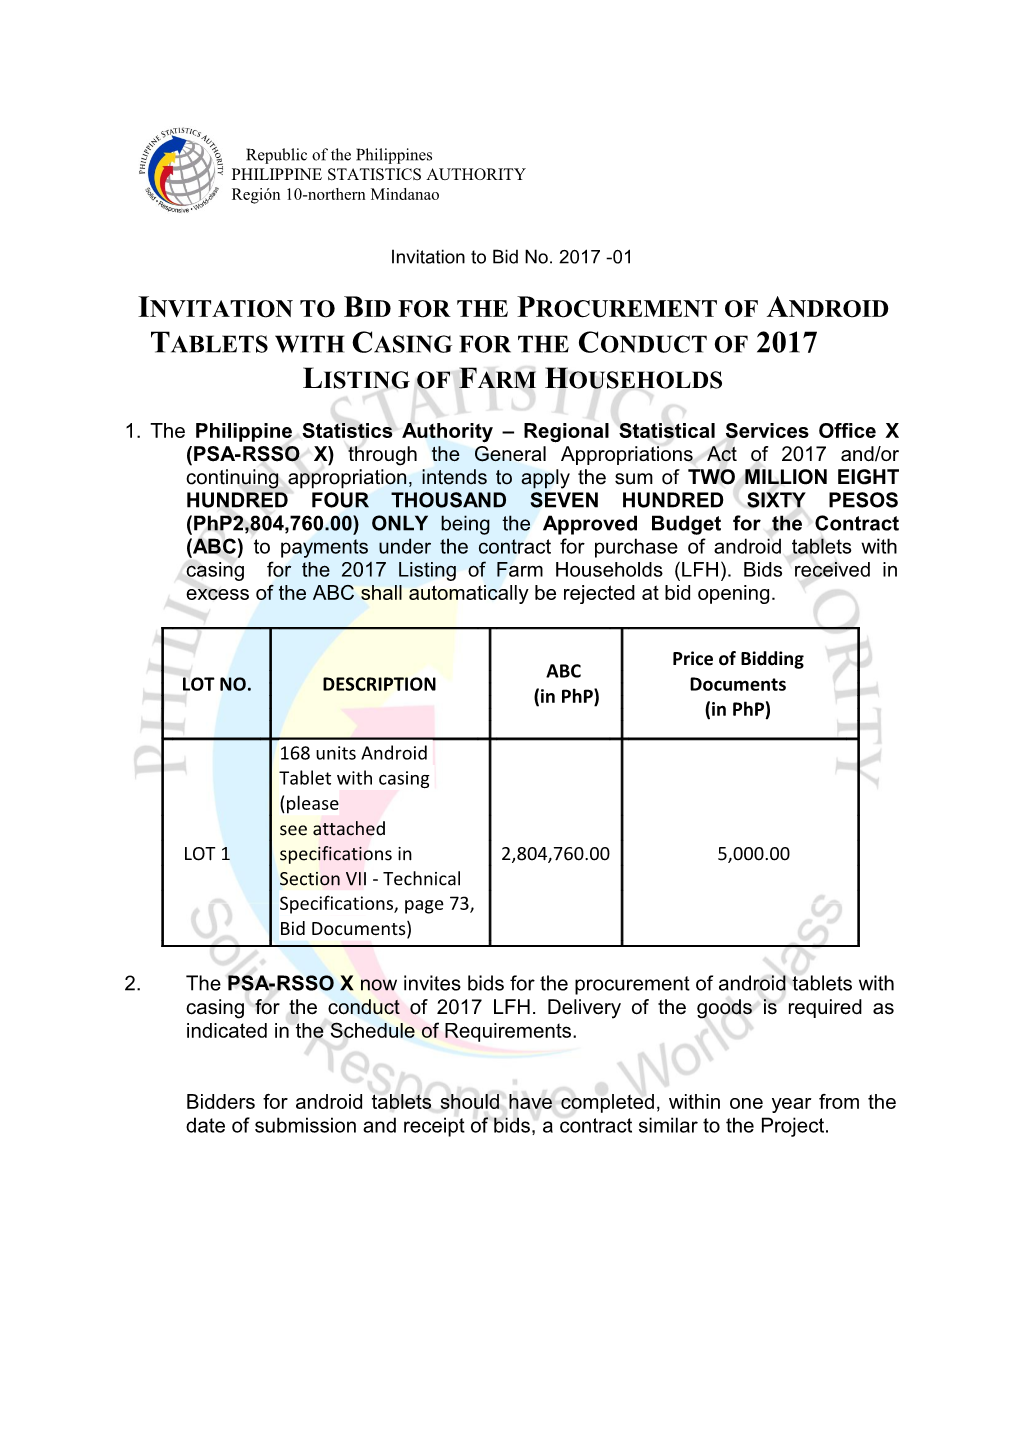 Invitation to Bid for the Procurement of Android